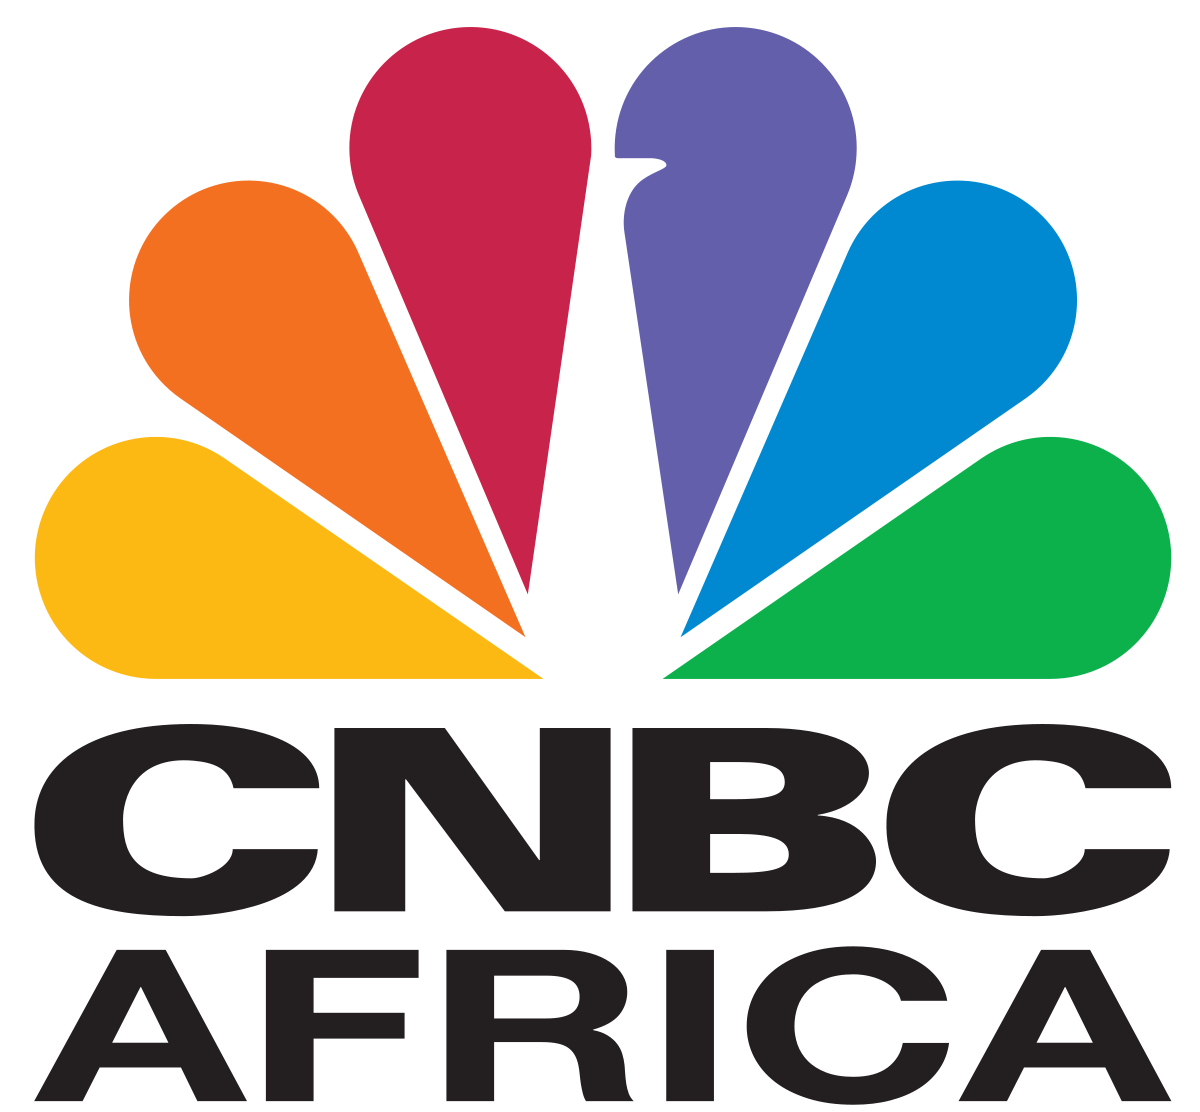 CNBC_Africa.svg.png